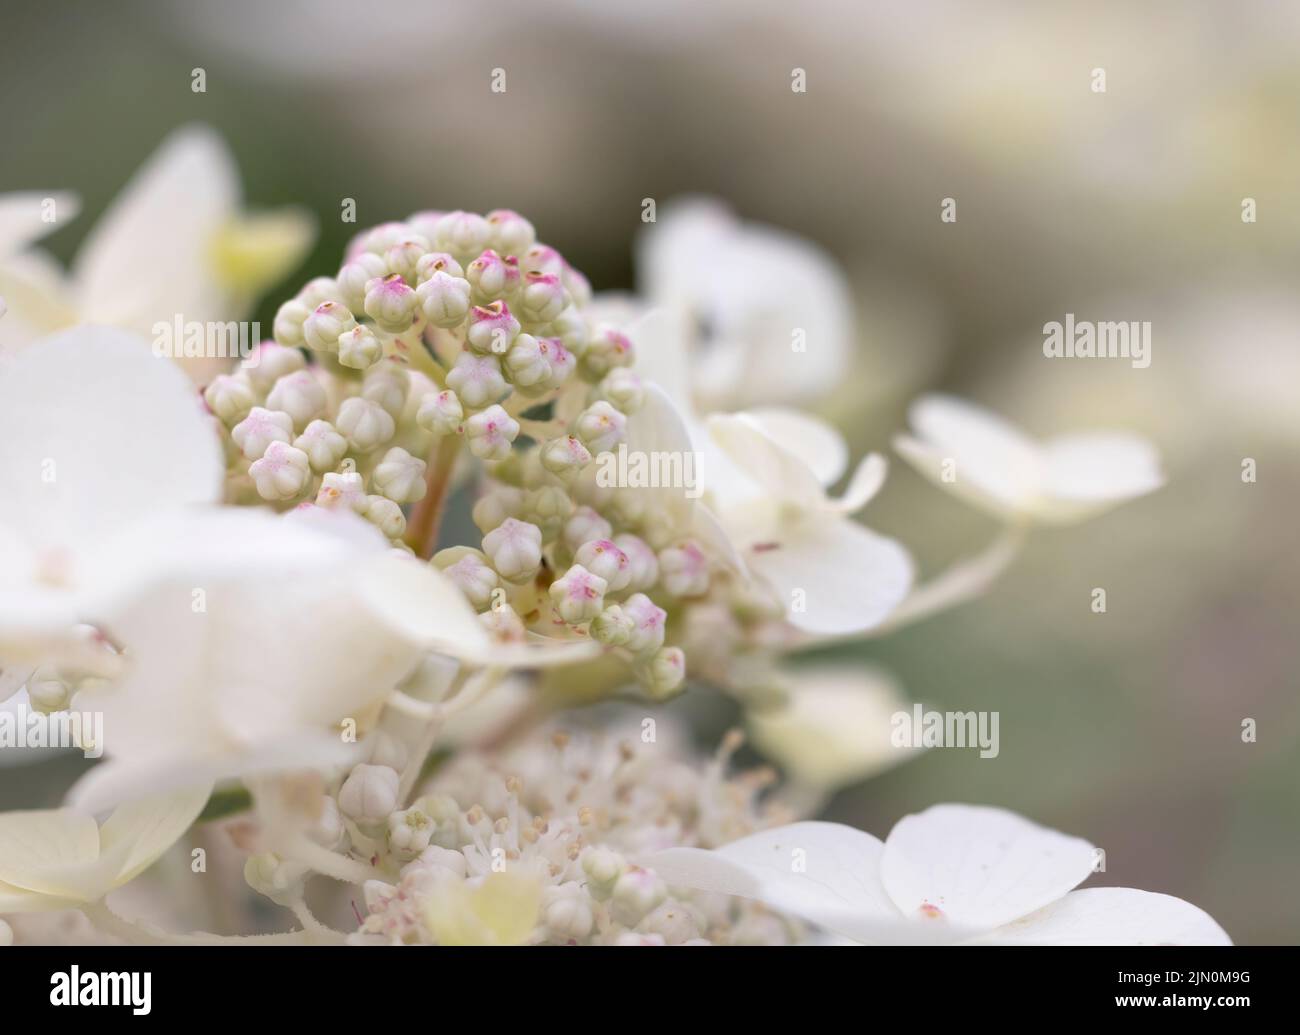 A close up of the flower head of a beautiful White Hydrangea showing open petals and buds Stock Photo